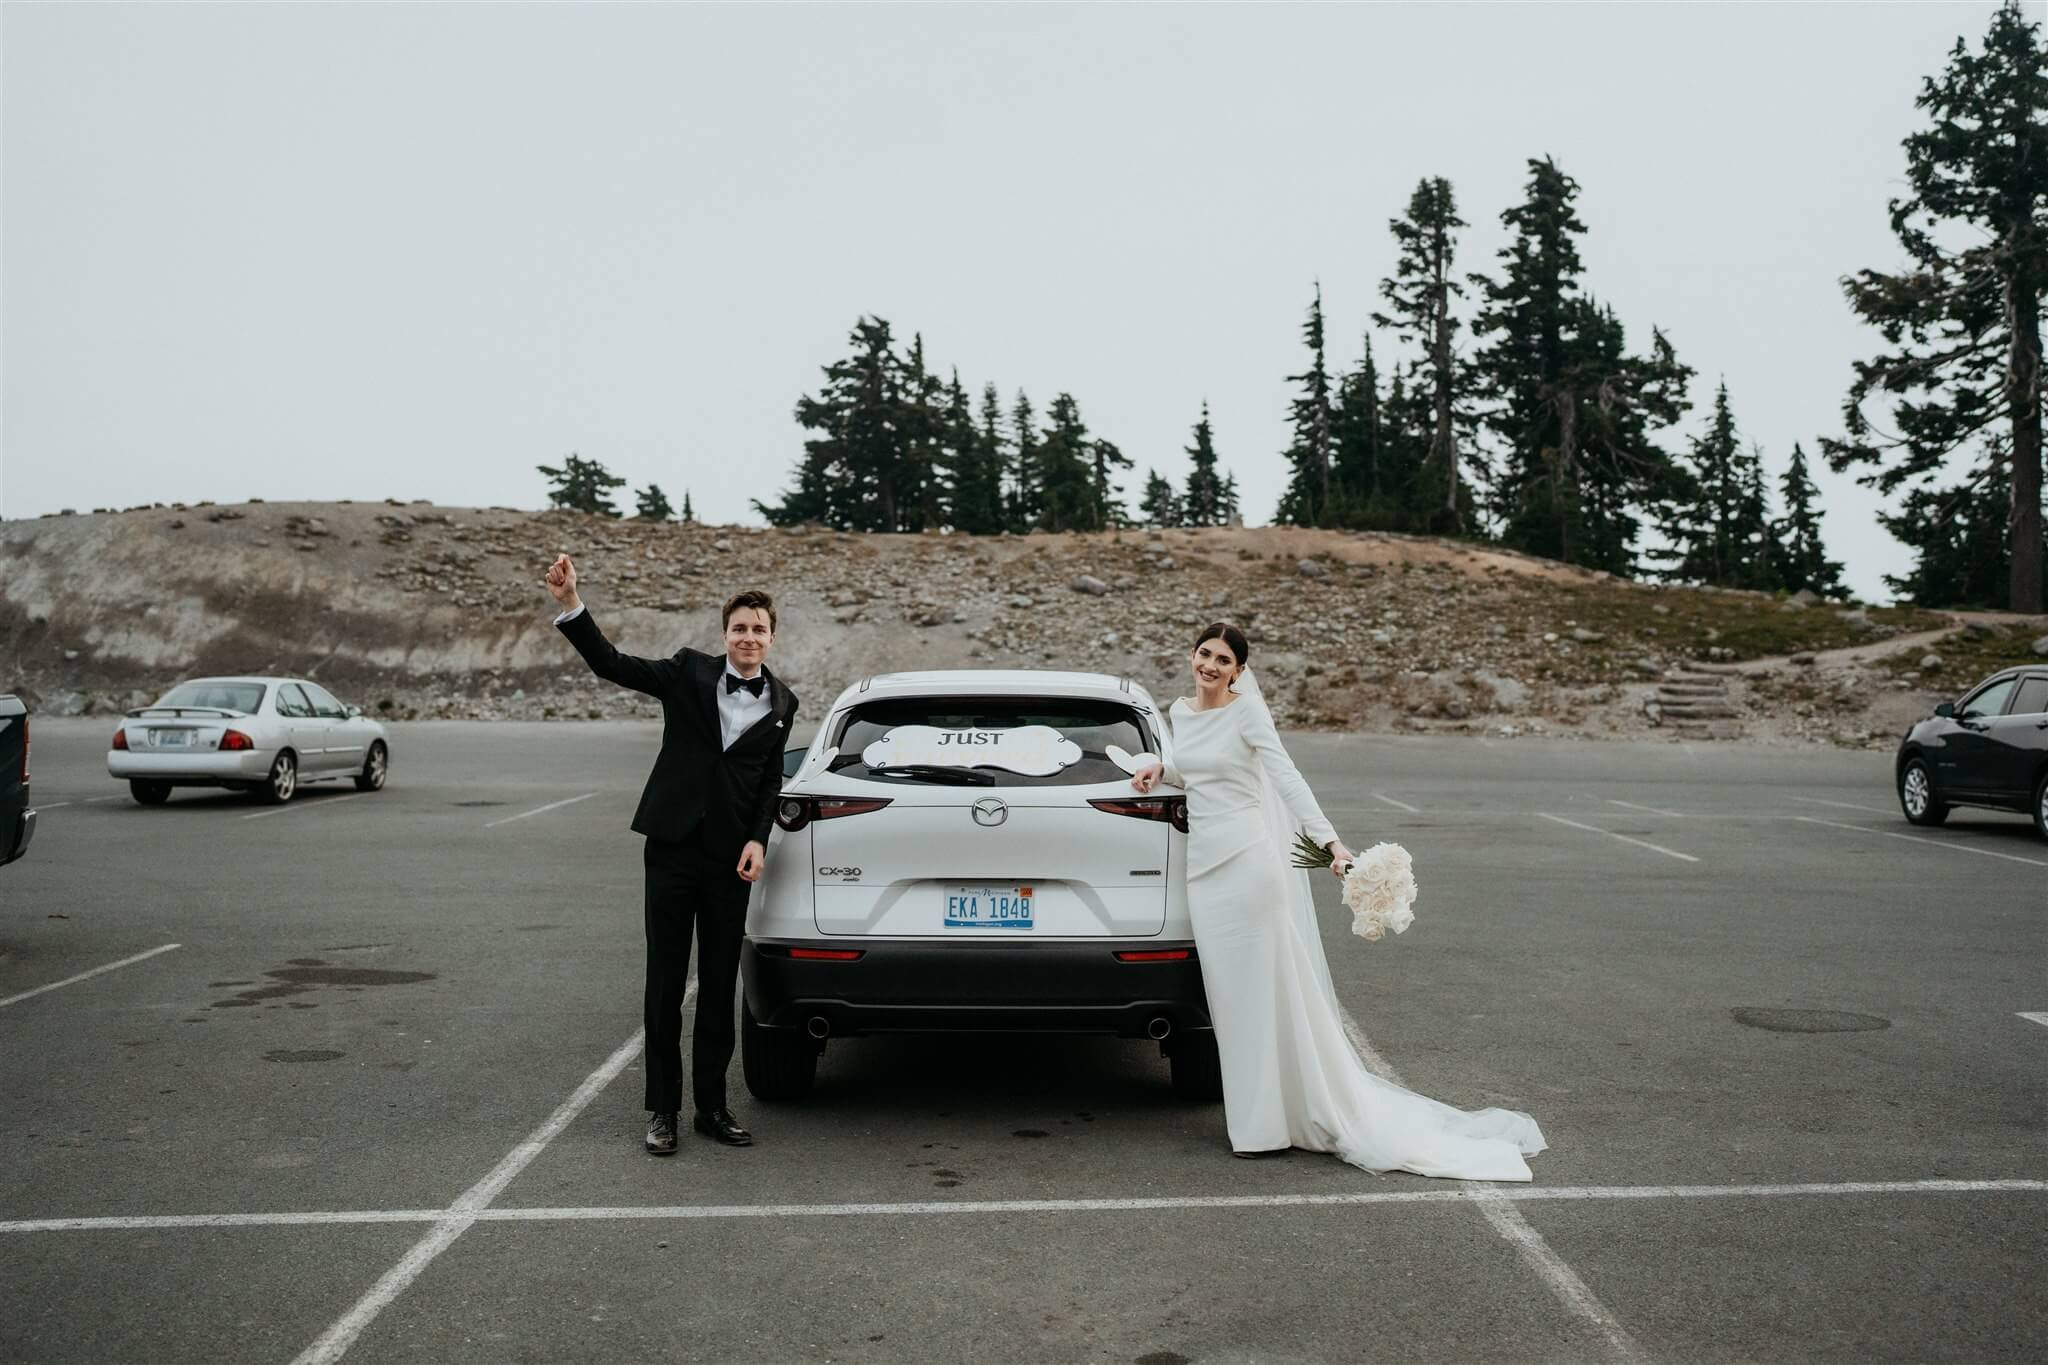 Bride and groom standing next to their white car with a "Just Married" sign on the back window